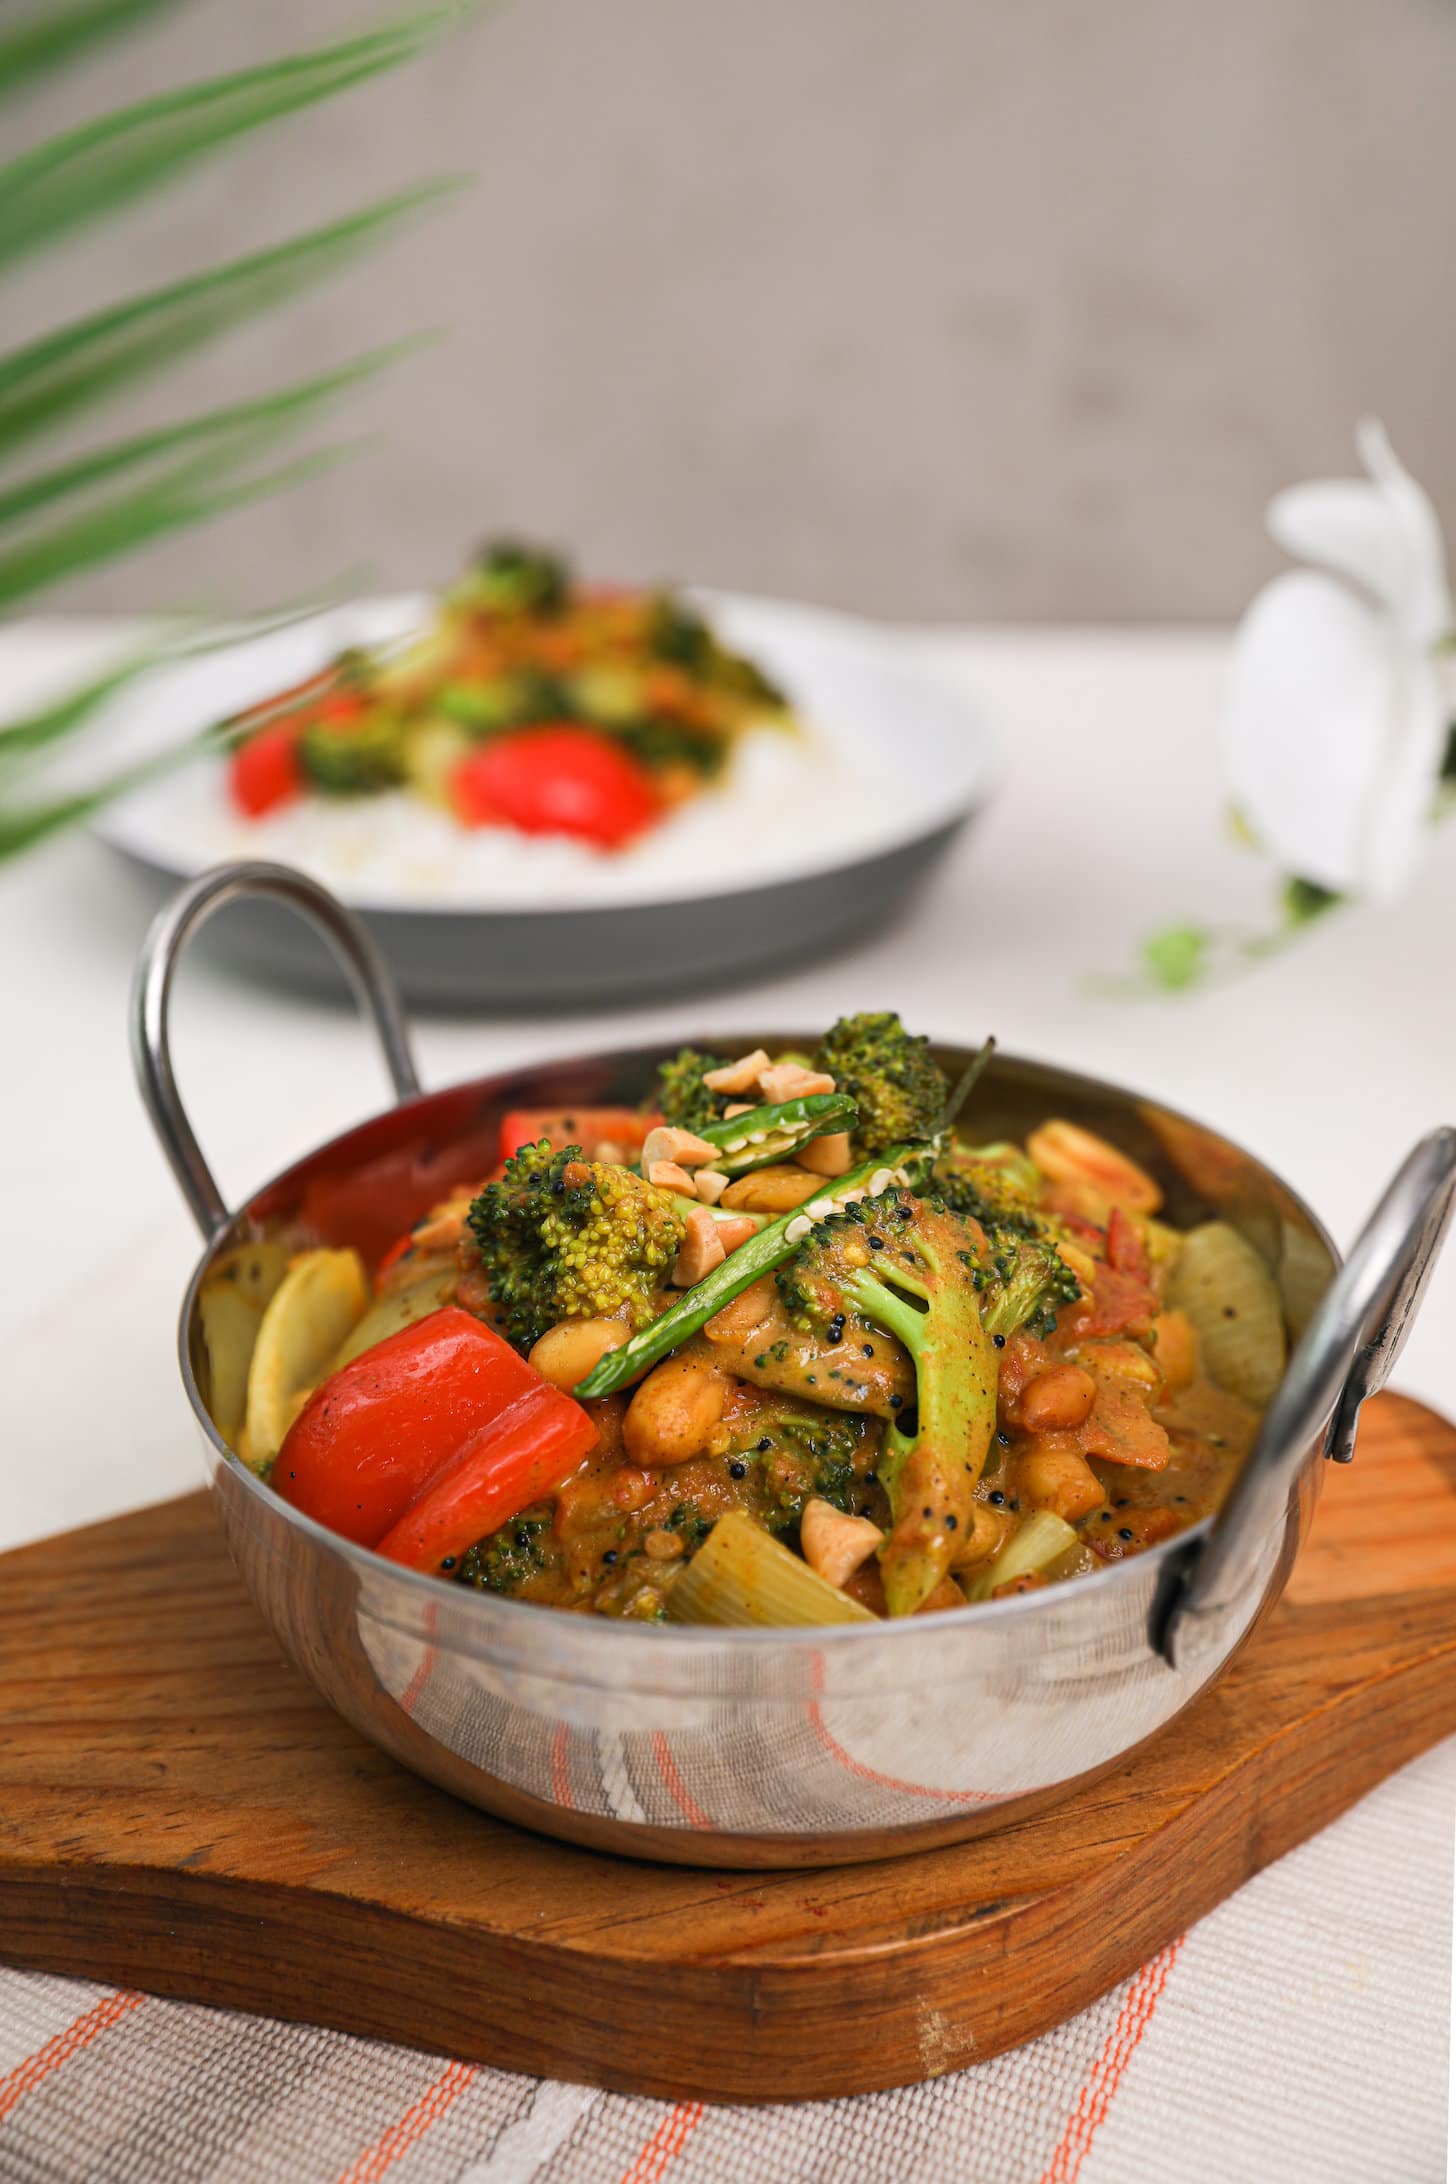 a close up image of a wok of cooked vegetables in a yellow sauce with another bowl in the background.